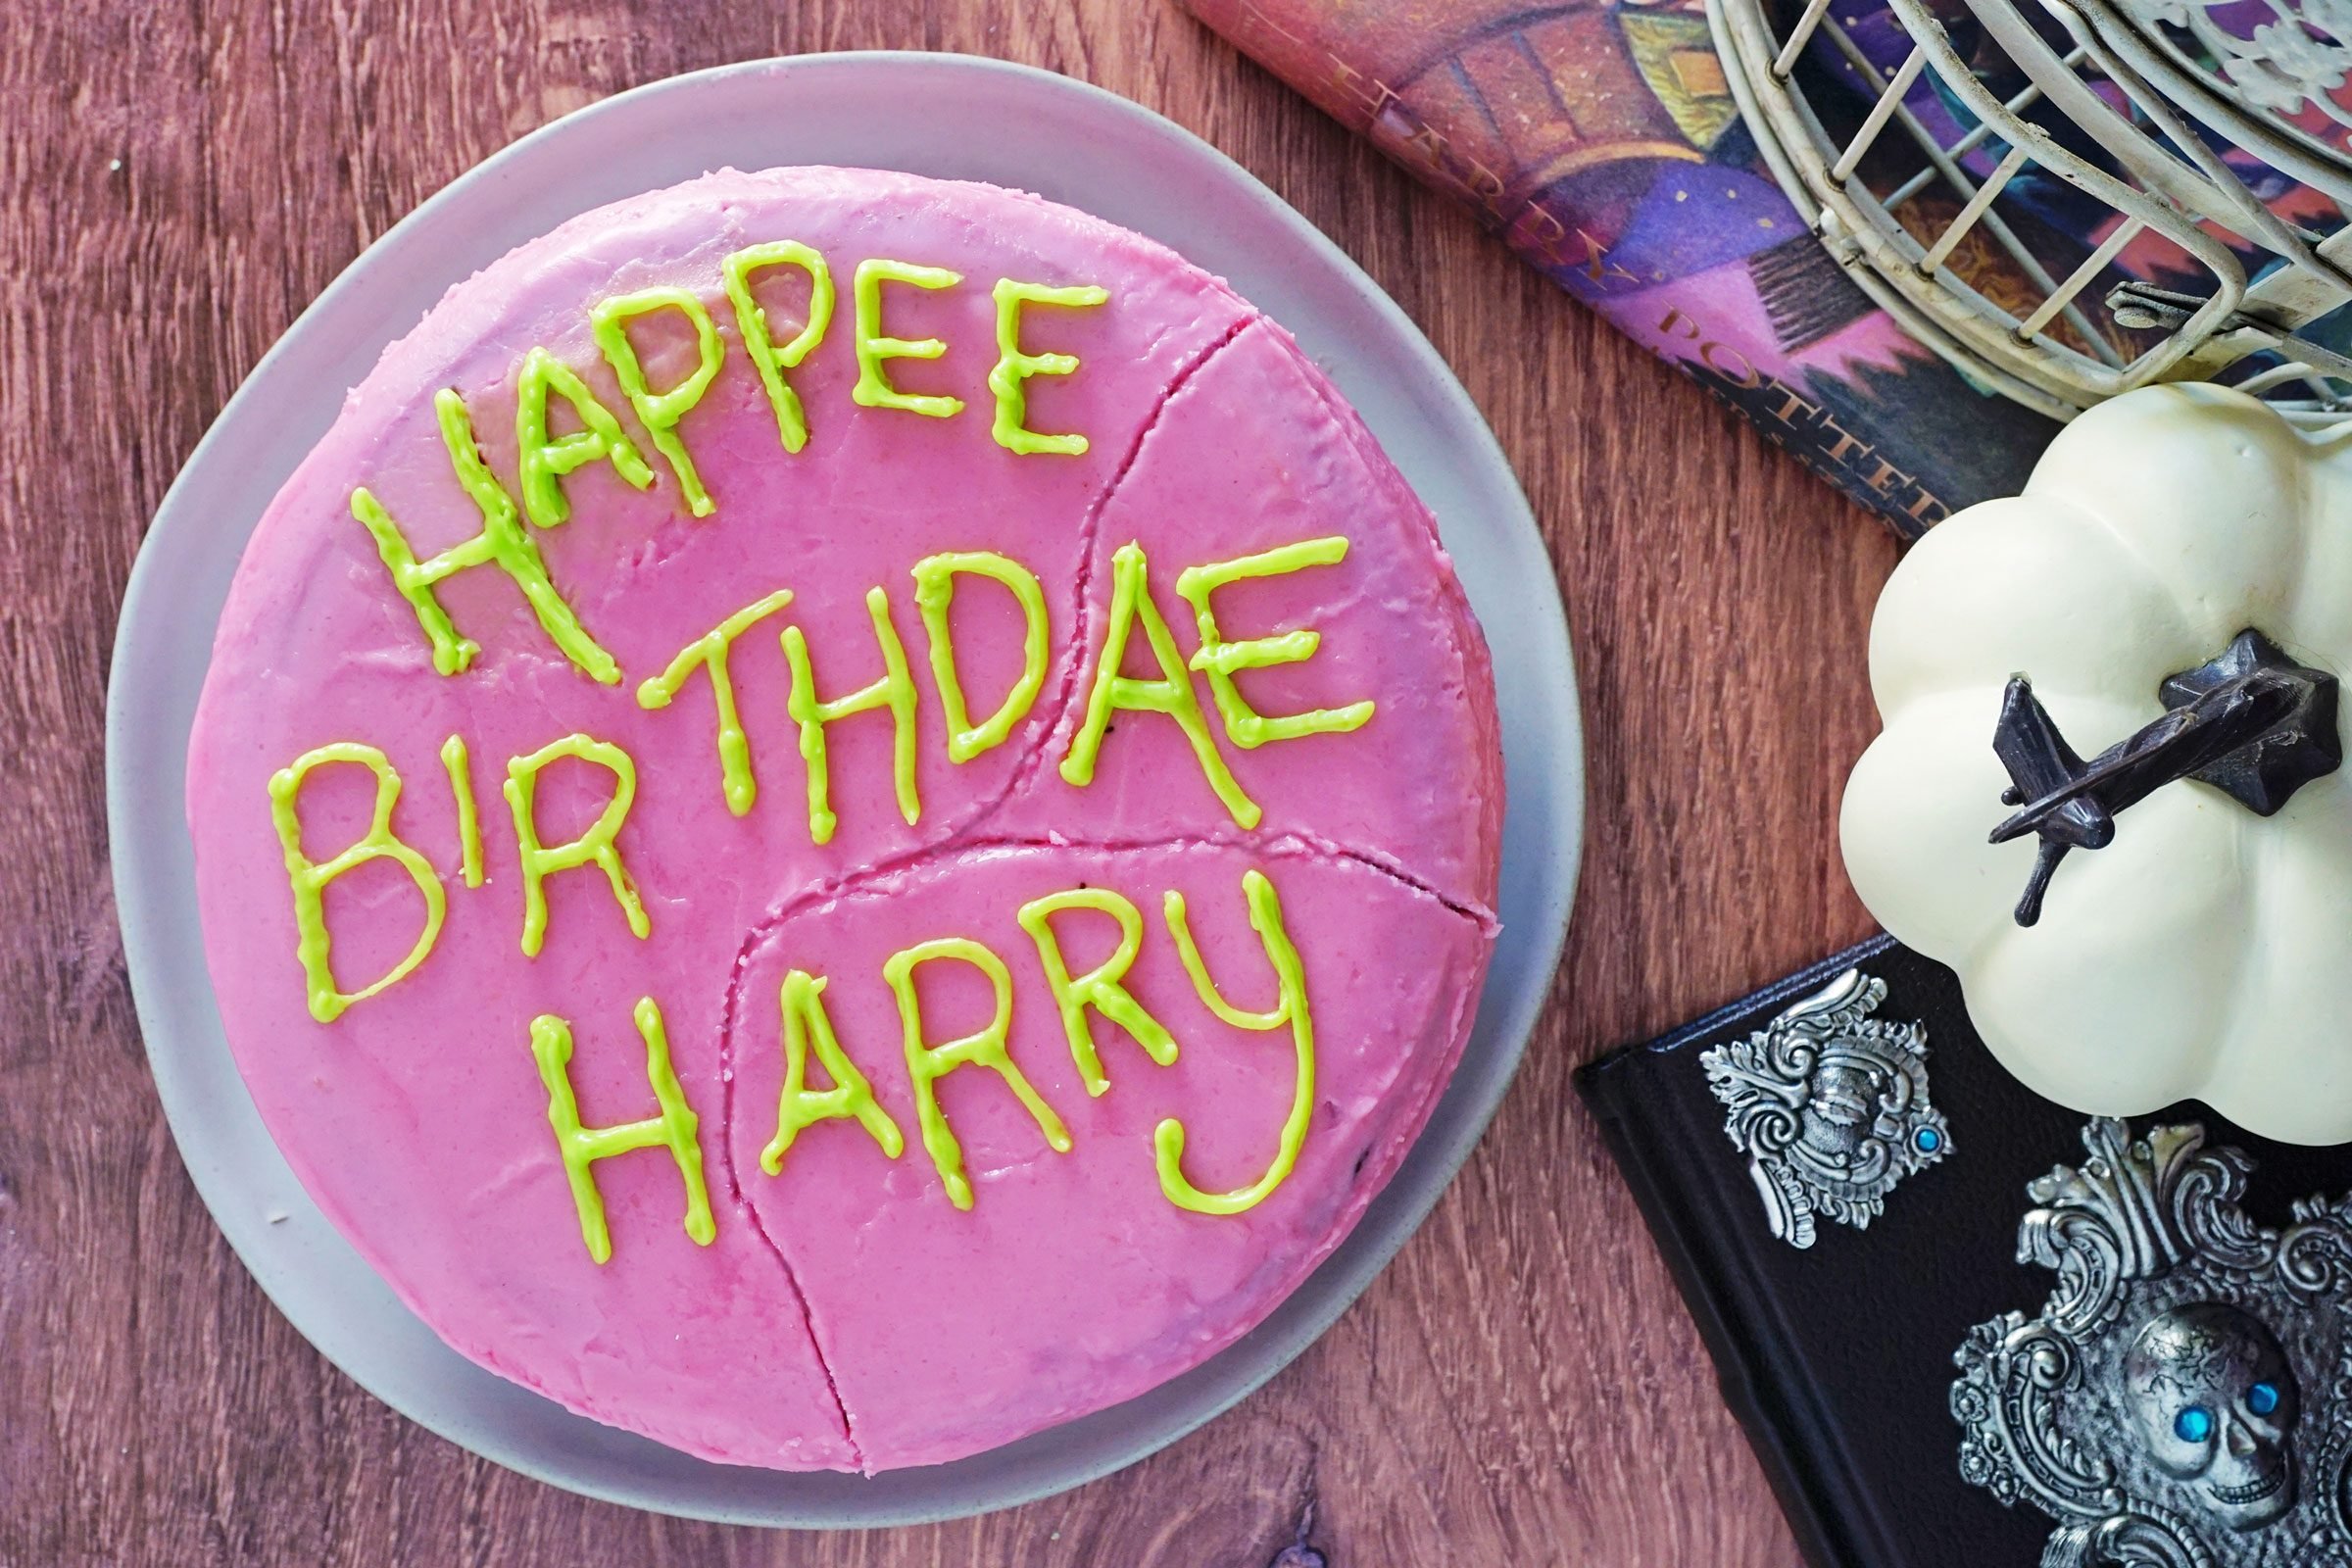 Bring magic into the kitchen with Harry Potter-inspired recipe